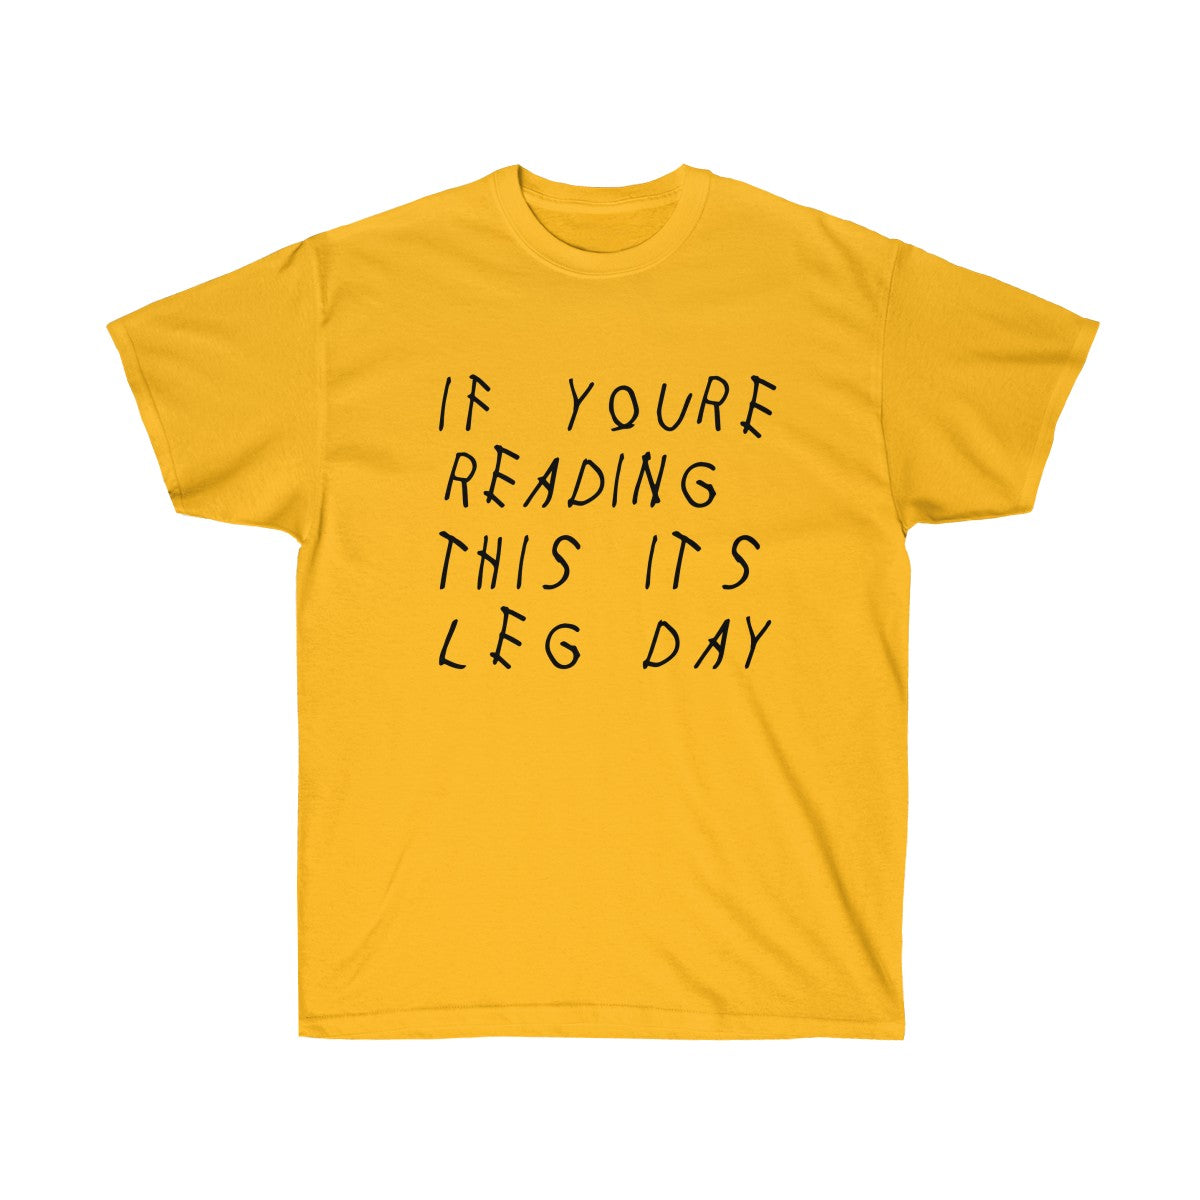 If your reading this it's leg day Drake inspired workout Tee-Gold-S-Archethype